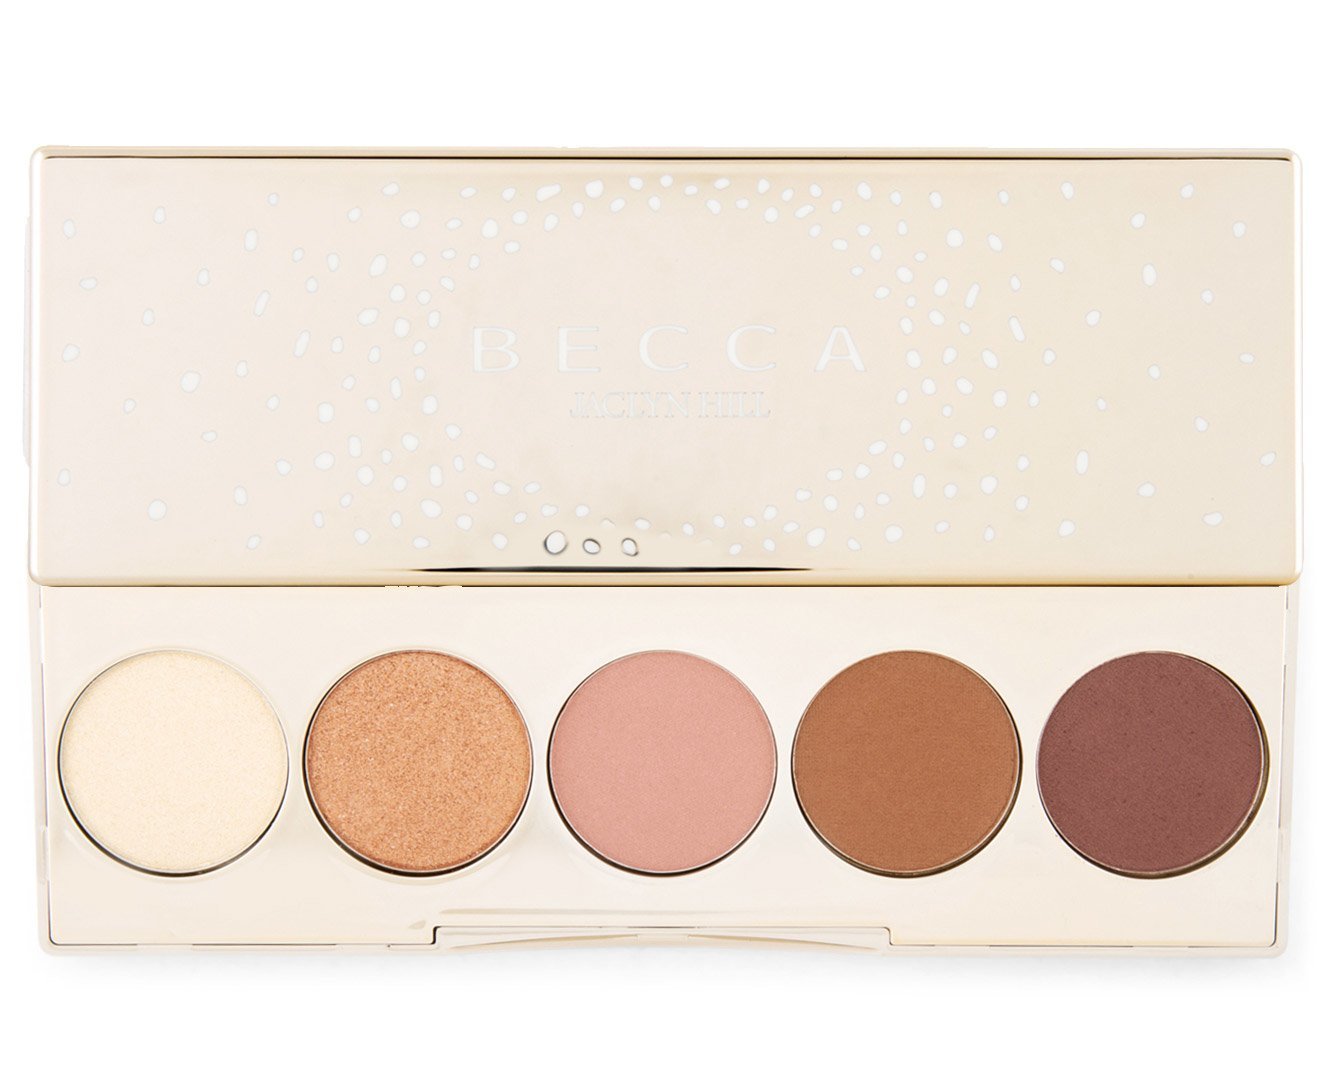 BECCA X Jaclyn Hill Champagne Collection Eye Palette - $58.41